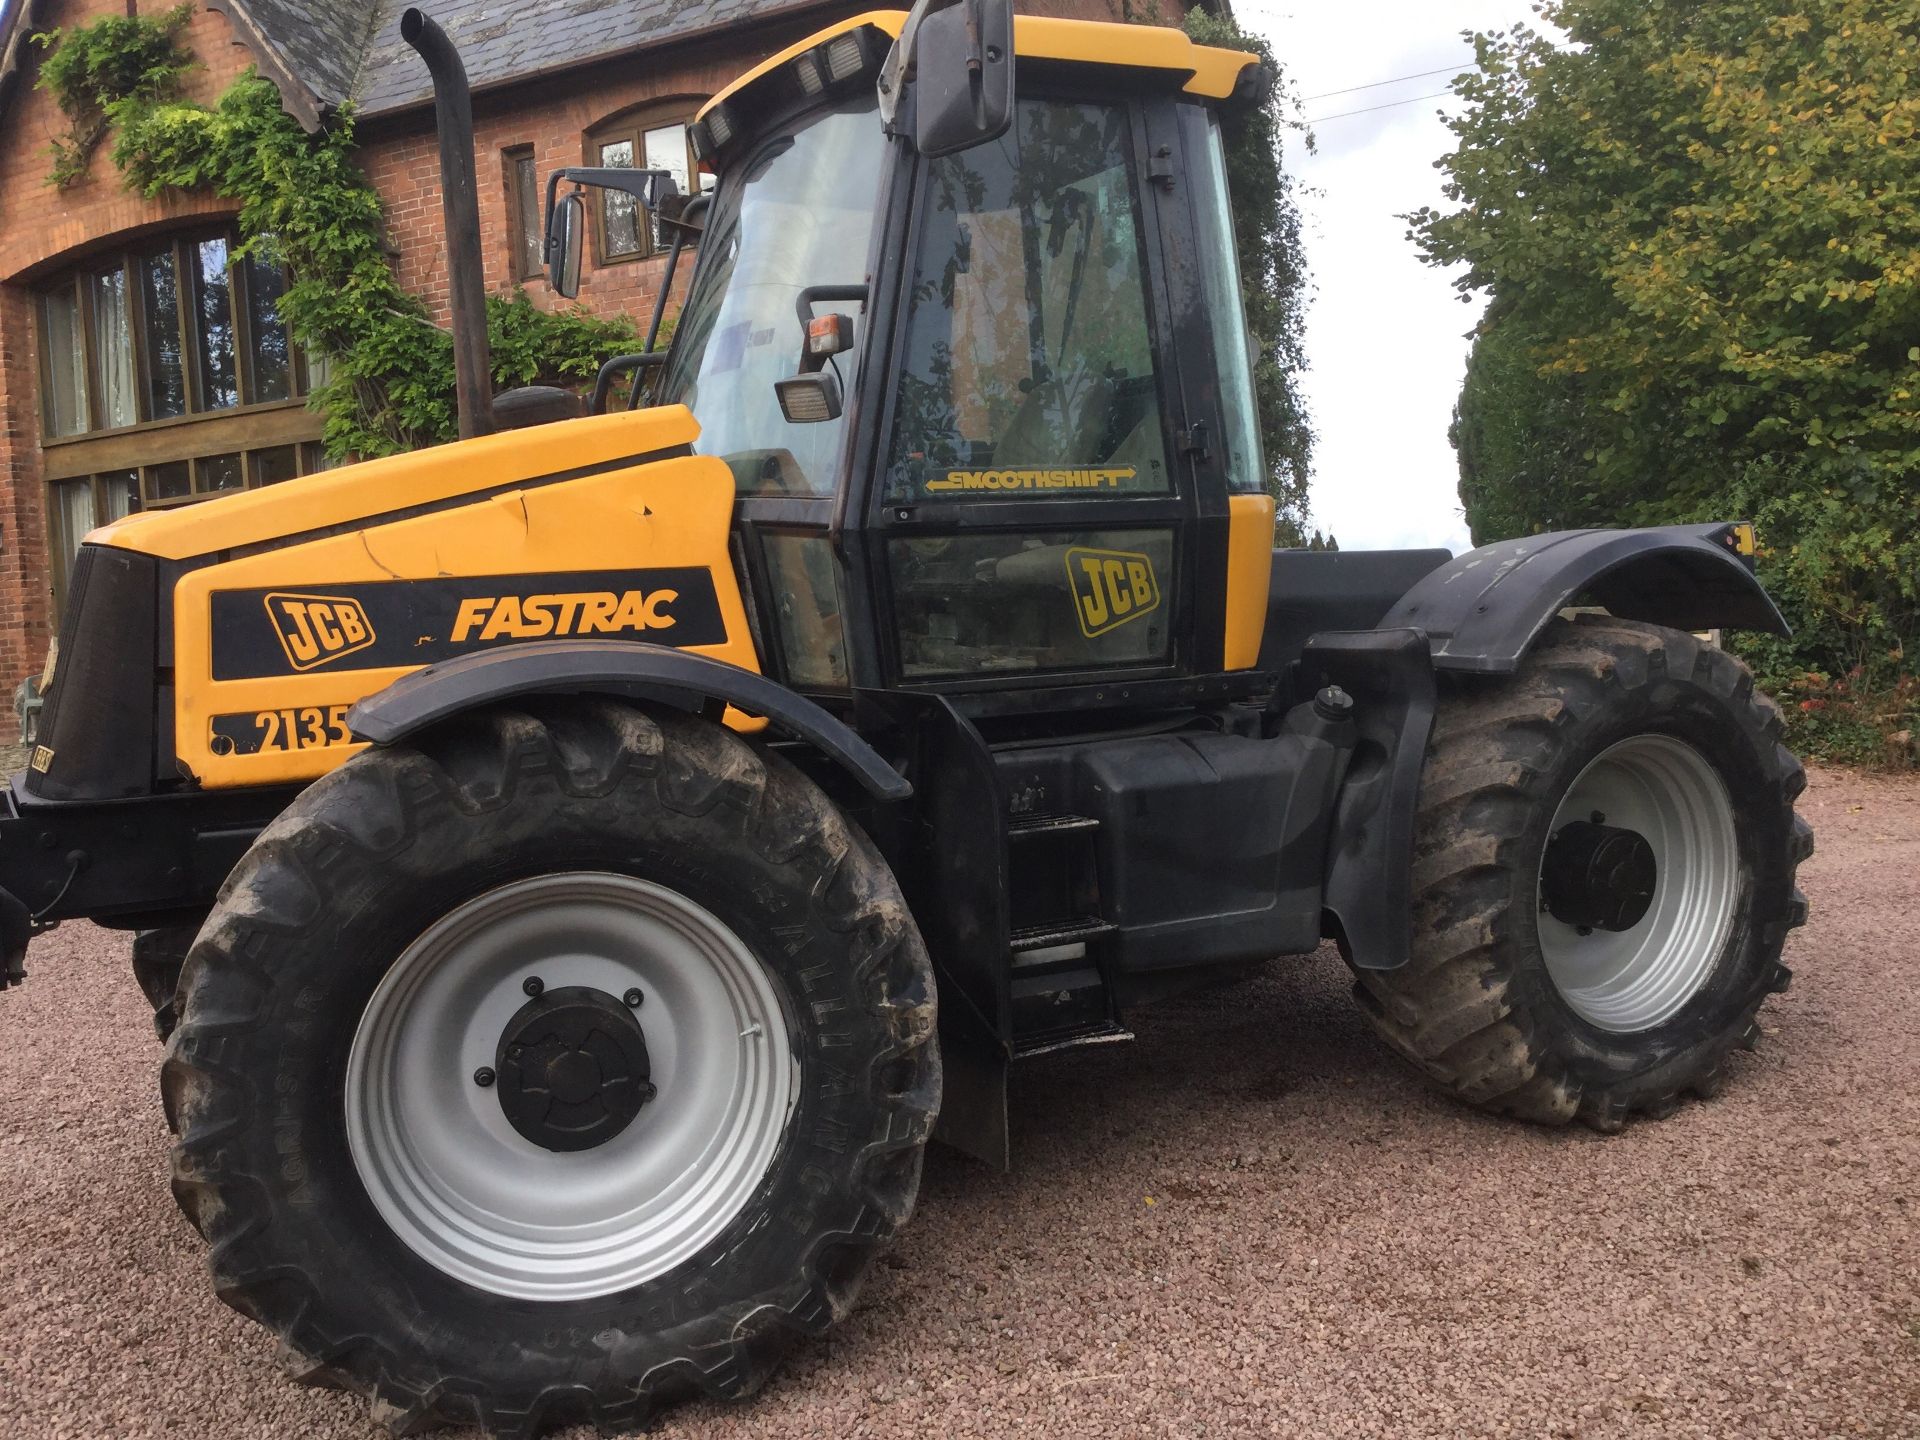 Jcb 2135 Fastrac Tractor - Image 2 of 3